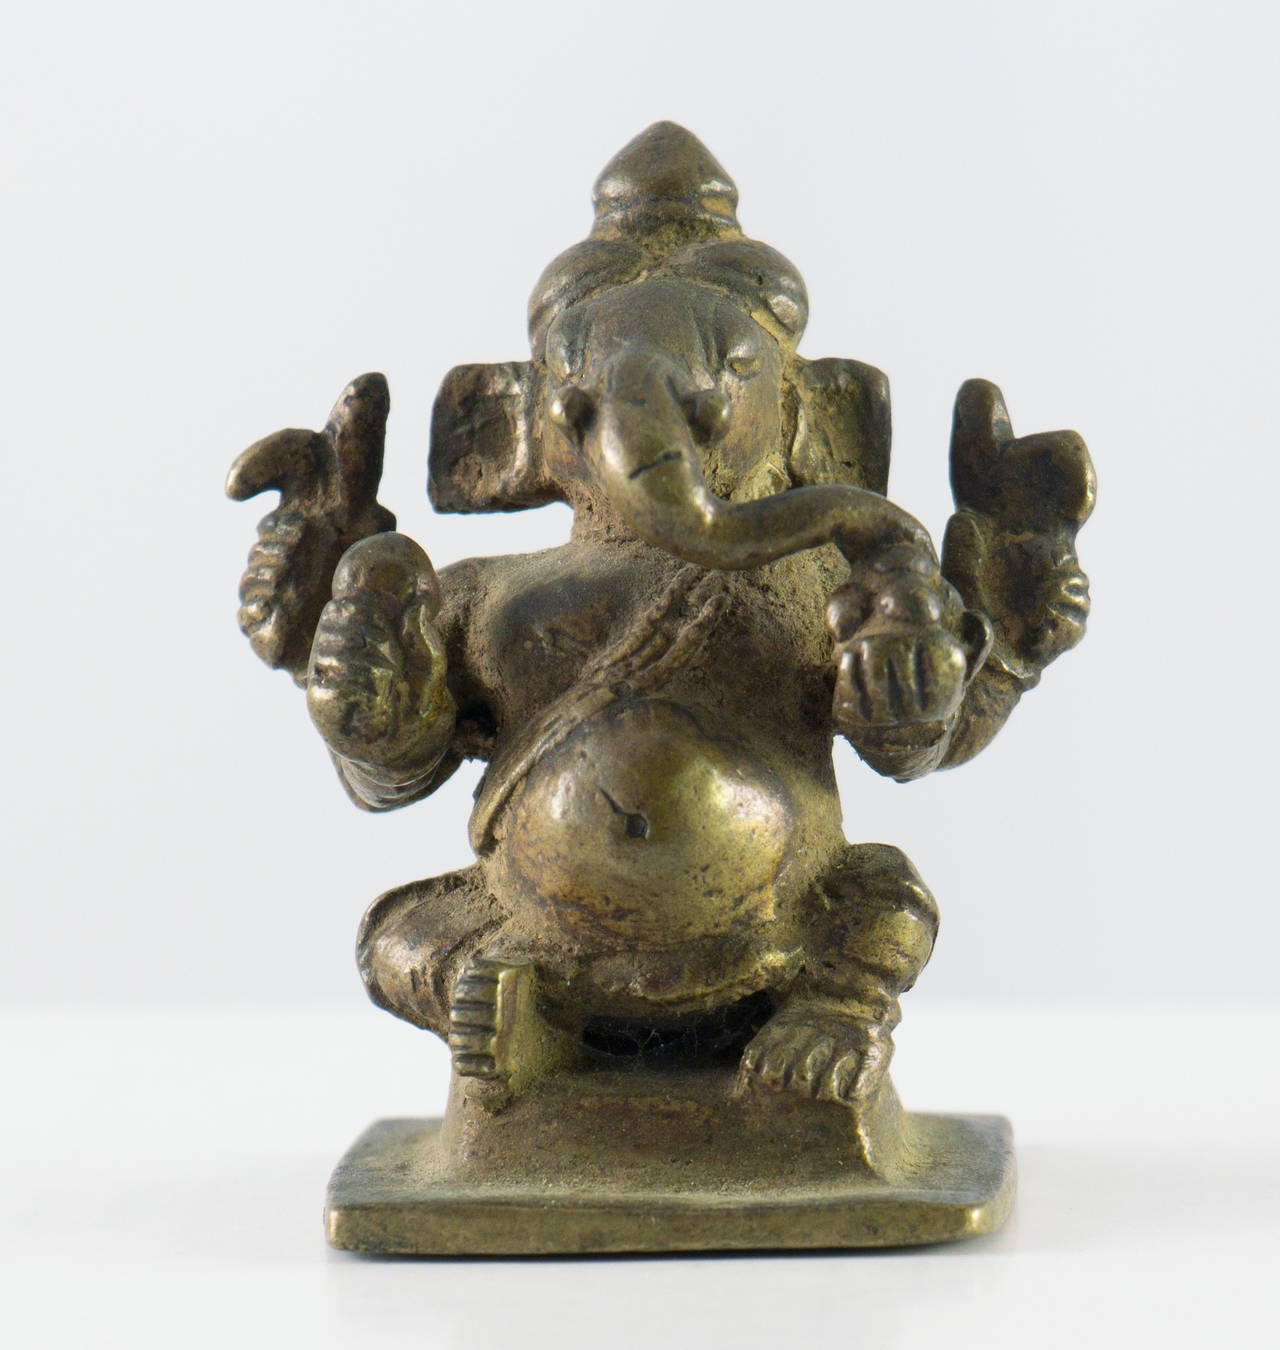 Fine example of Ganesh the remover of obstacles.